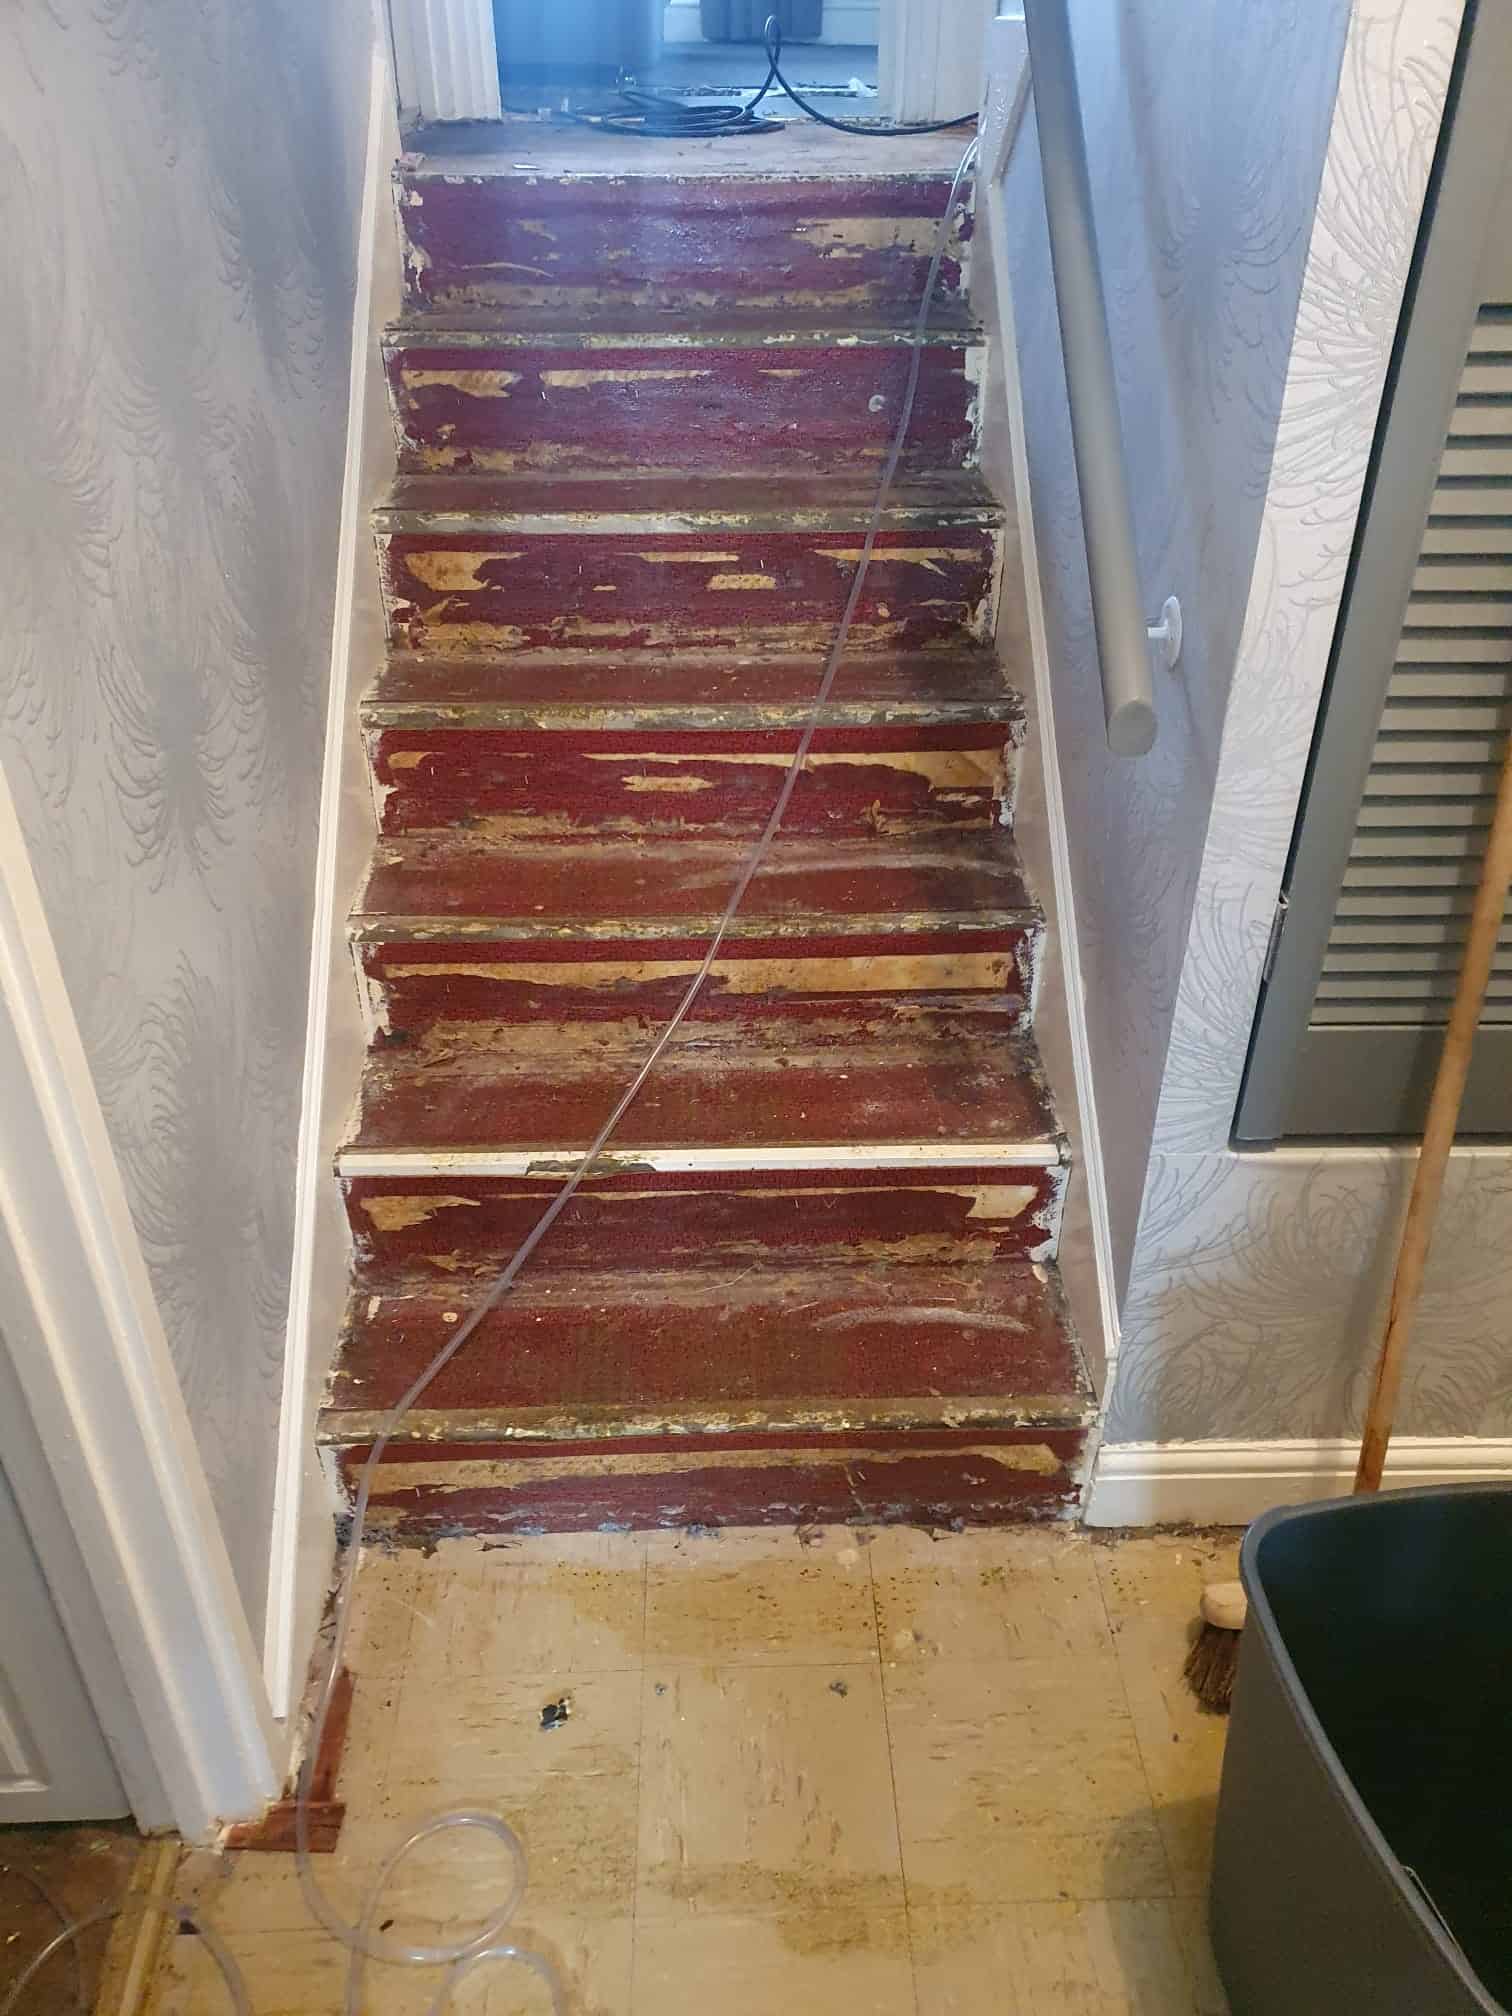 The stairs leading to the bathroom and bedroom have had to be completely stripped